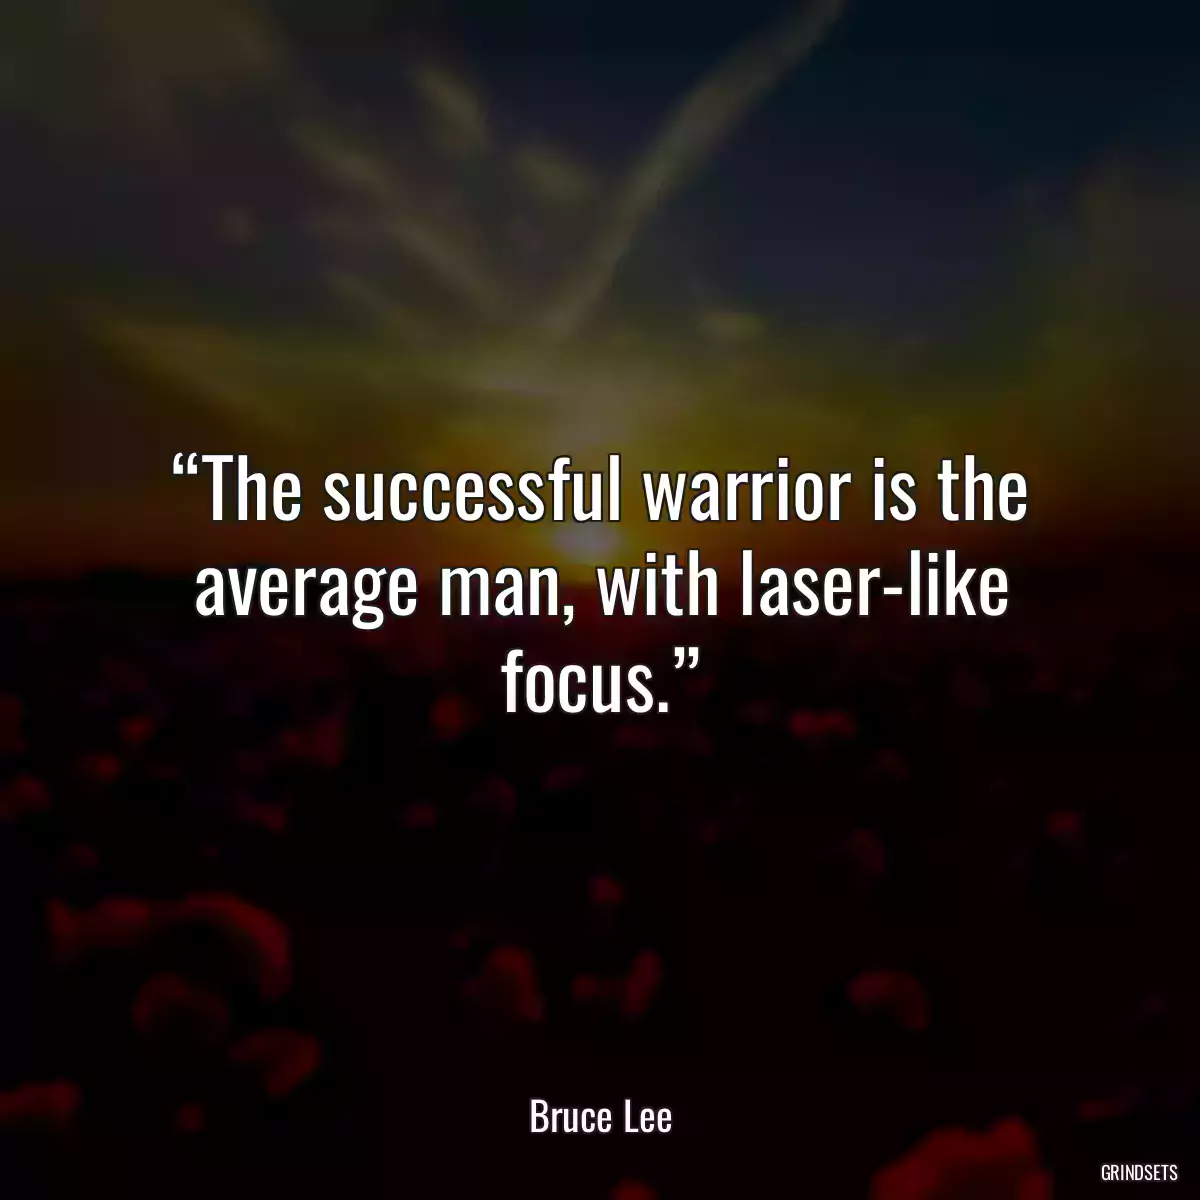 “The successful warrior is the average man, with laser-like focus.”